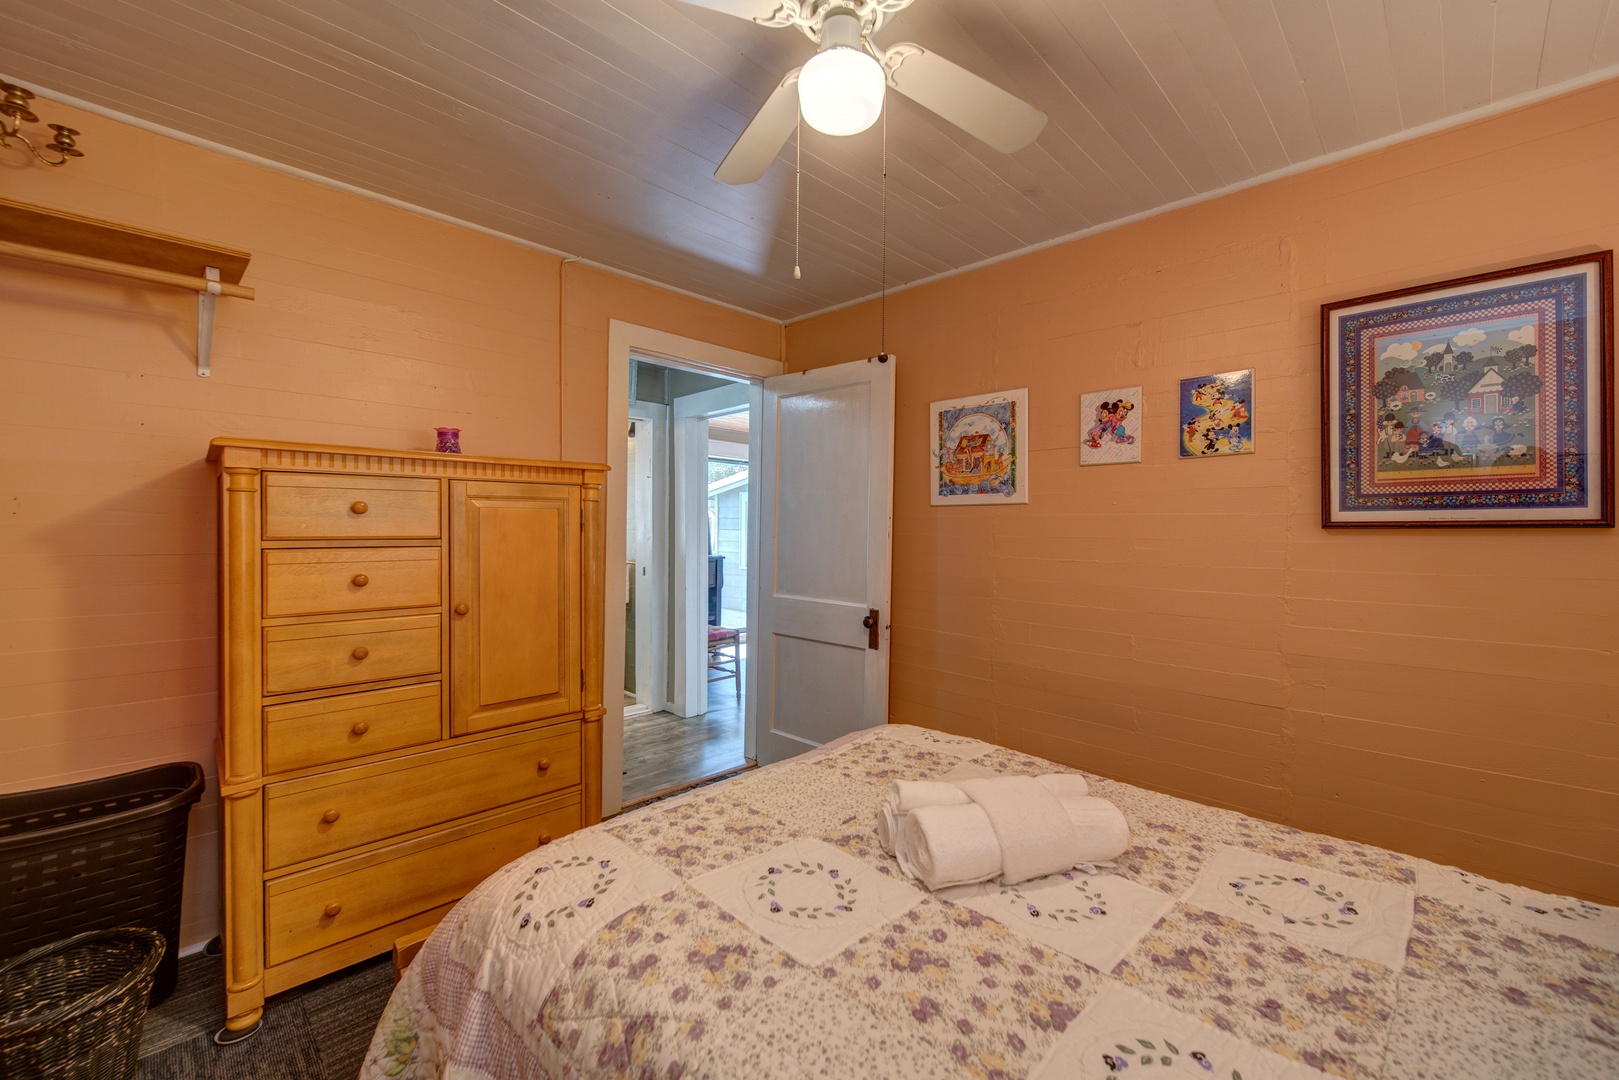 The 1st of 3 bedrooms offers a cozy queen bed & ceiling fan